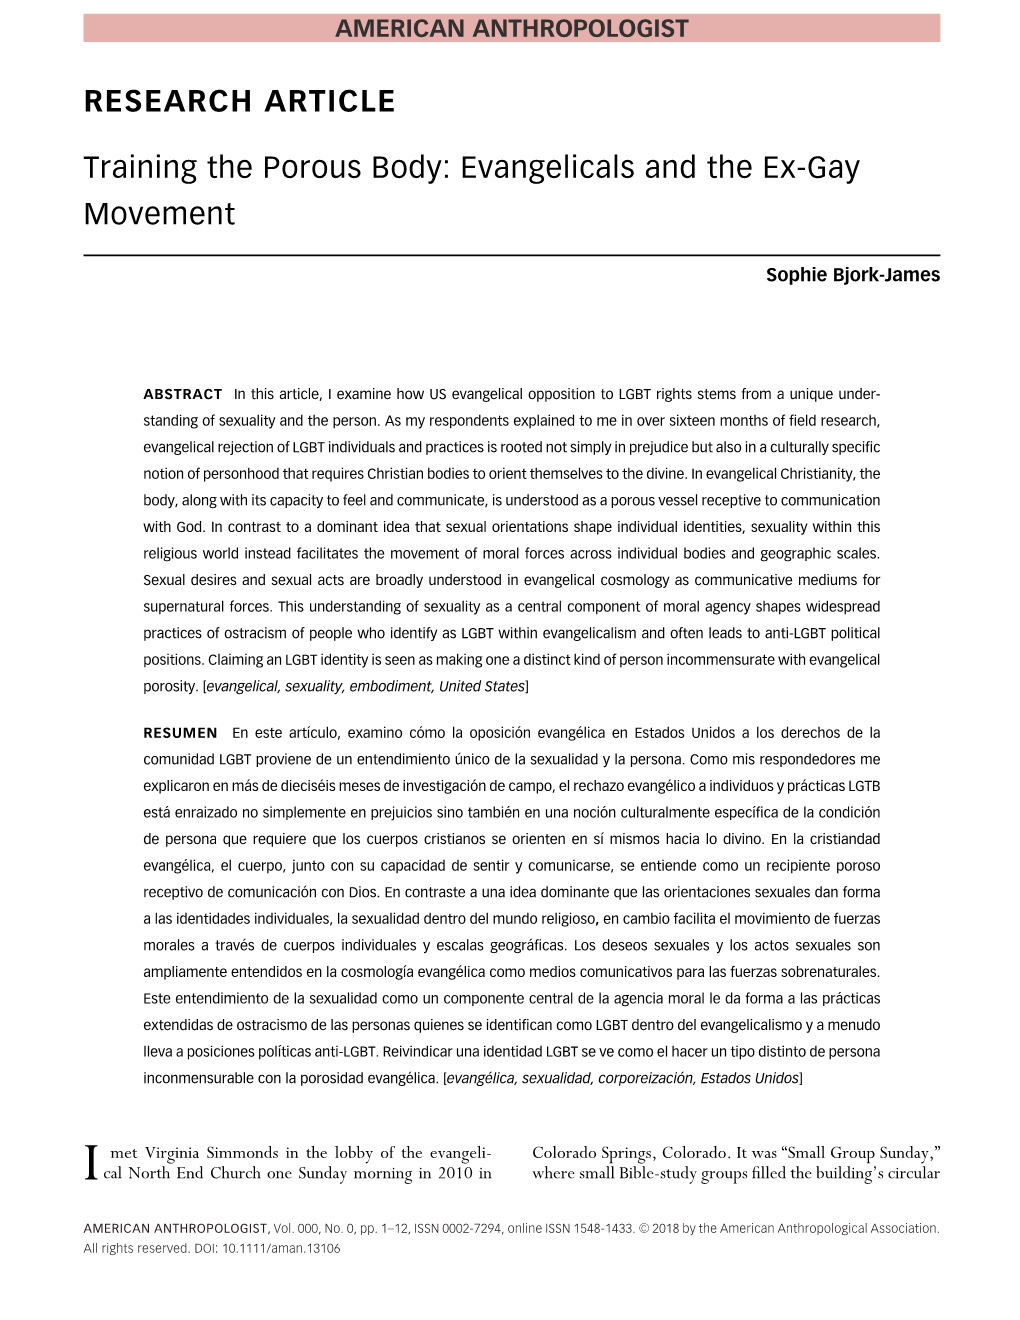 Training the Porous Body: Evangelicals and the Ex&#X02010